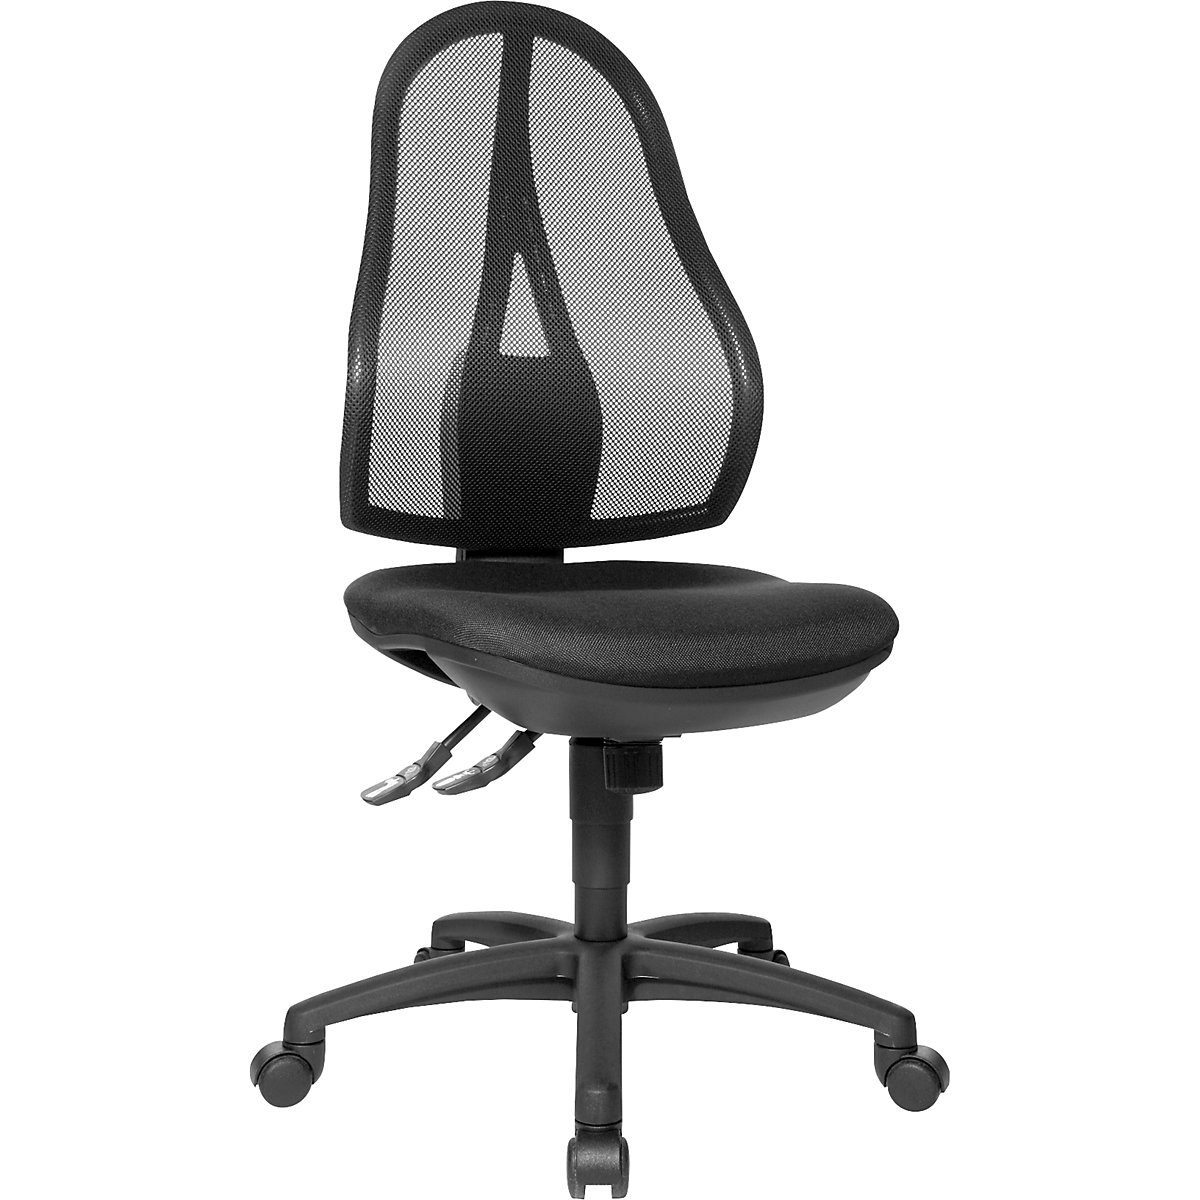 OPEN POINT SY office swivel chair - Topstar